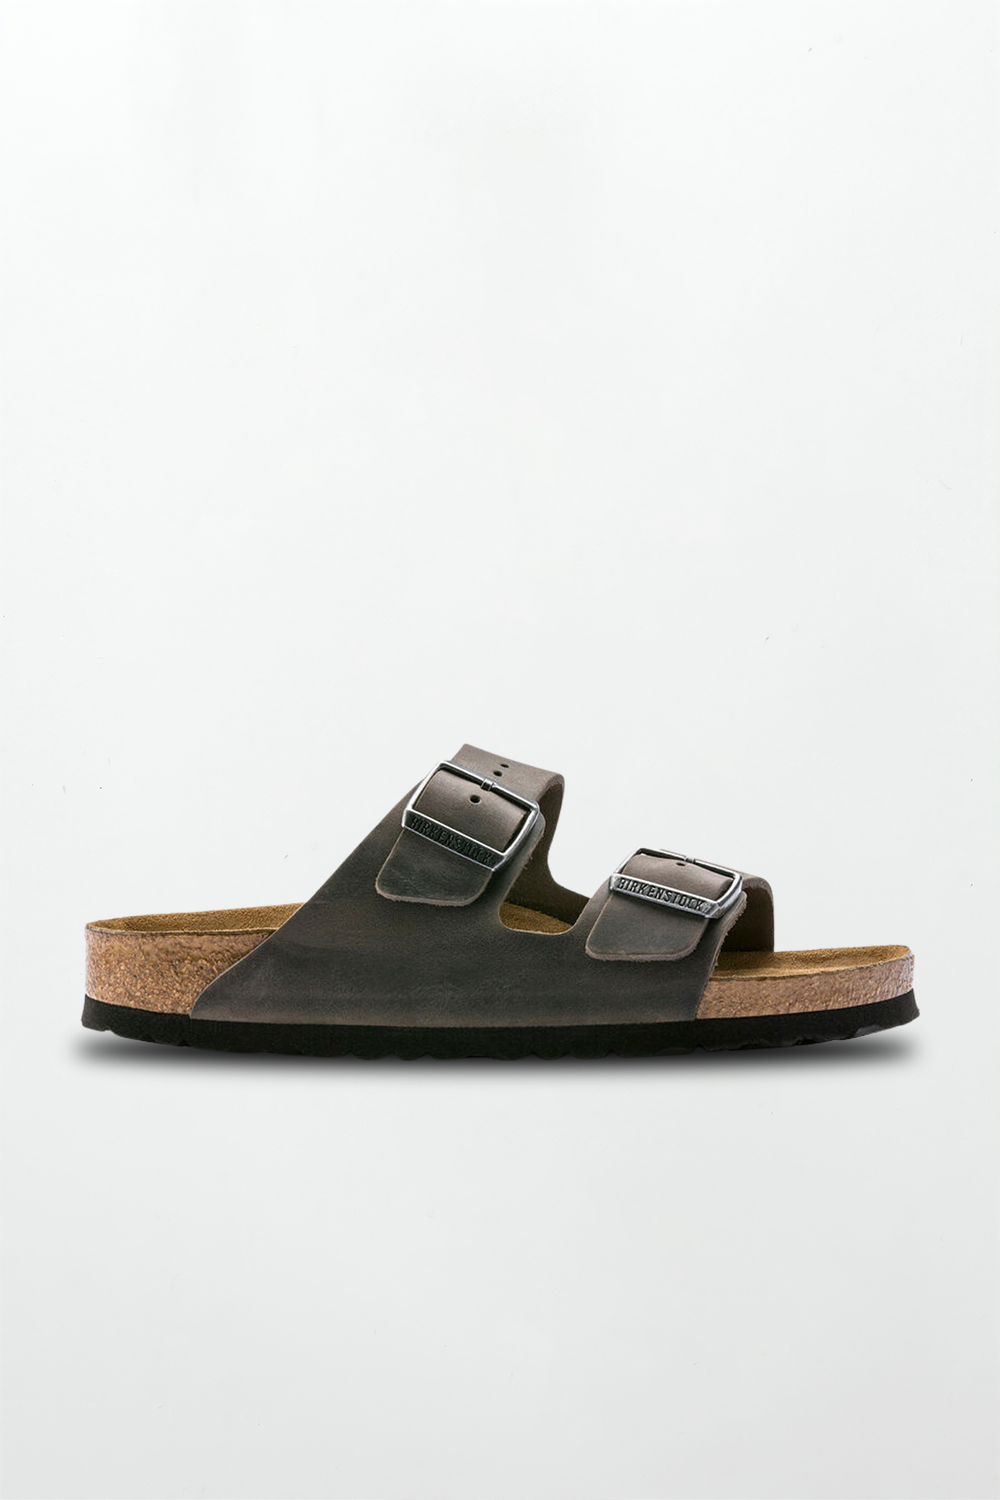 Arizona Oiled Leather in Iron (Soft Footbed - Suede Lined) - Milu James St